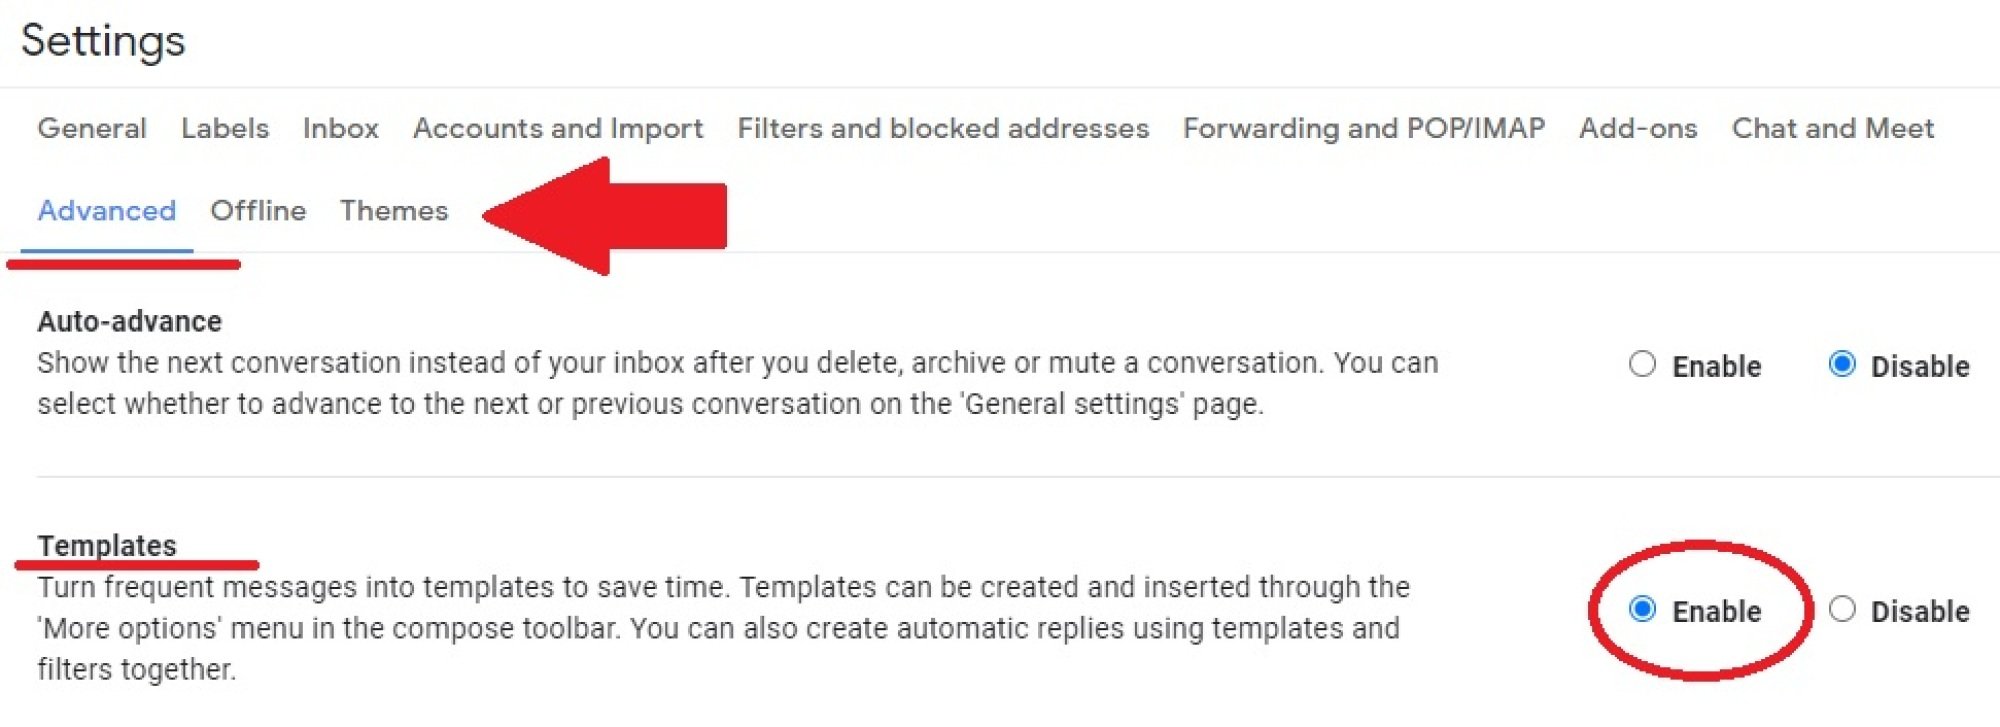 A Gmail Settings screenshot of the "Advanced" options with "Templates" enabled and highlighted. 